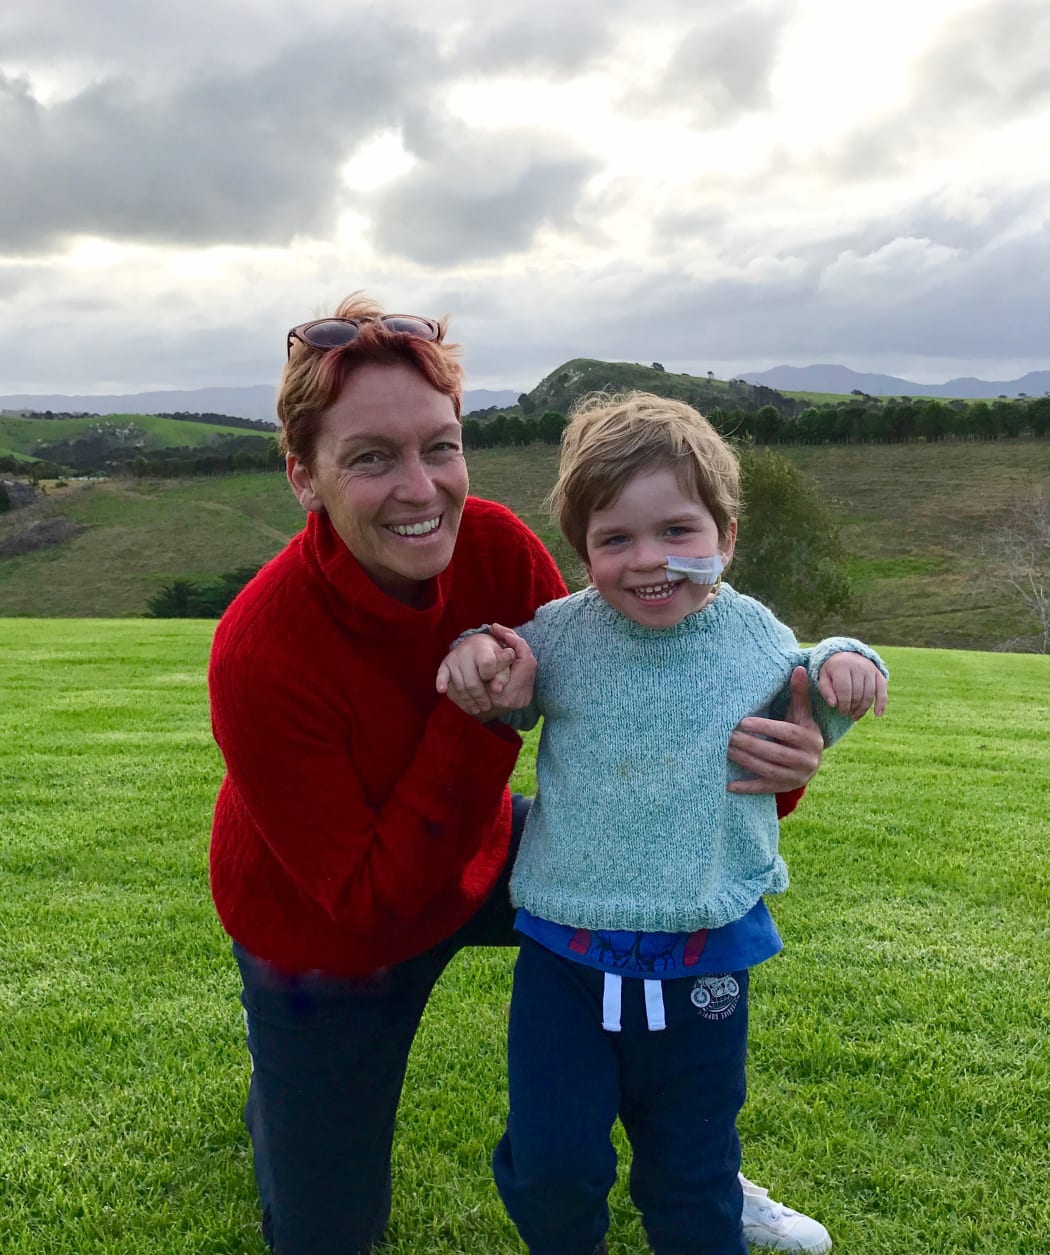 Lucy Bennett and her son David, who has neurofibromatosis type 1 and moyamoya syndrome.